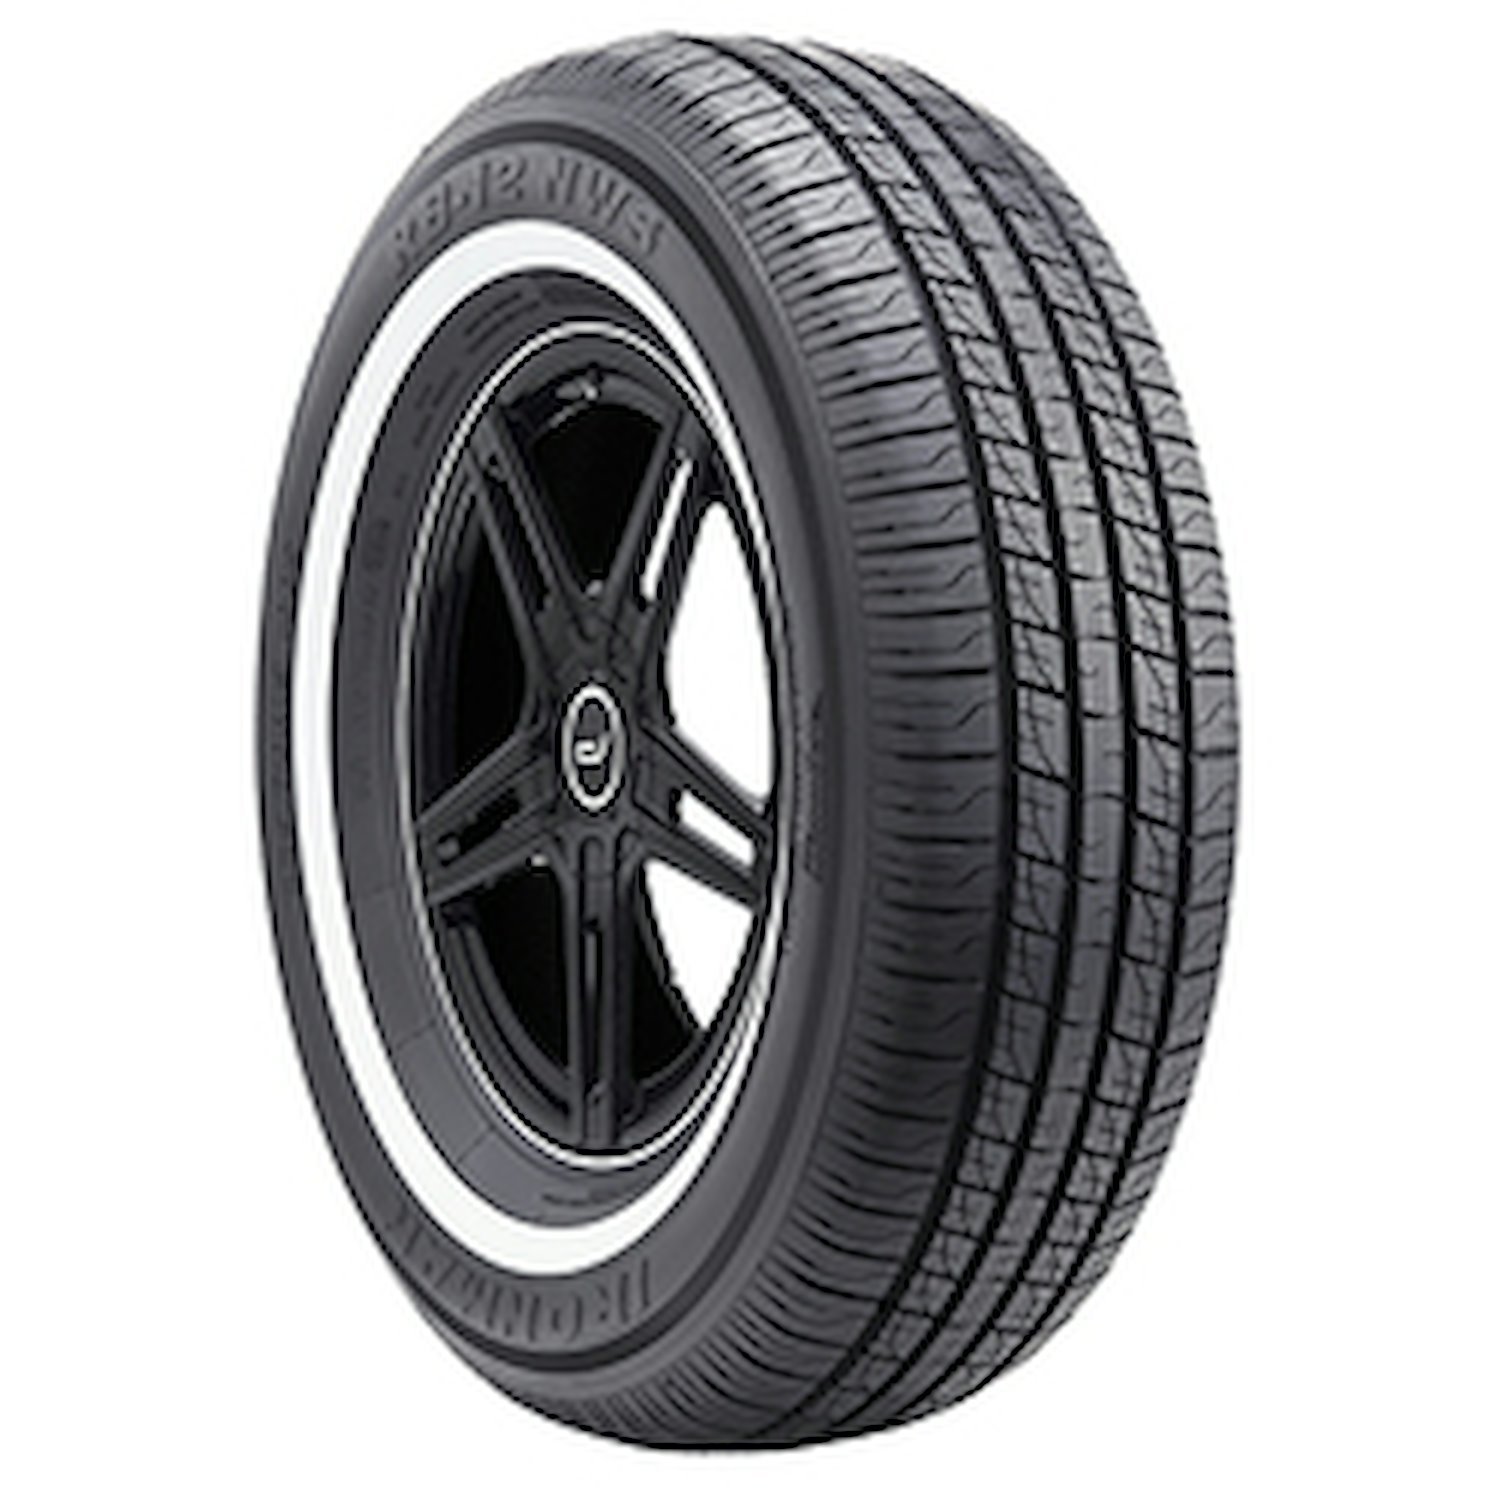 RB-12 NWS Tire, 205/70R15 96S